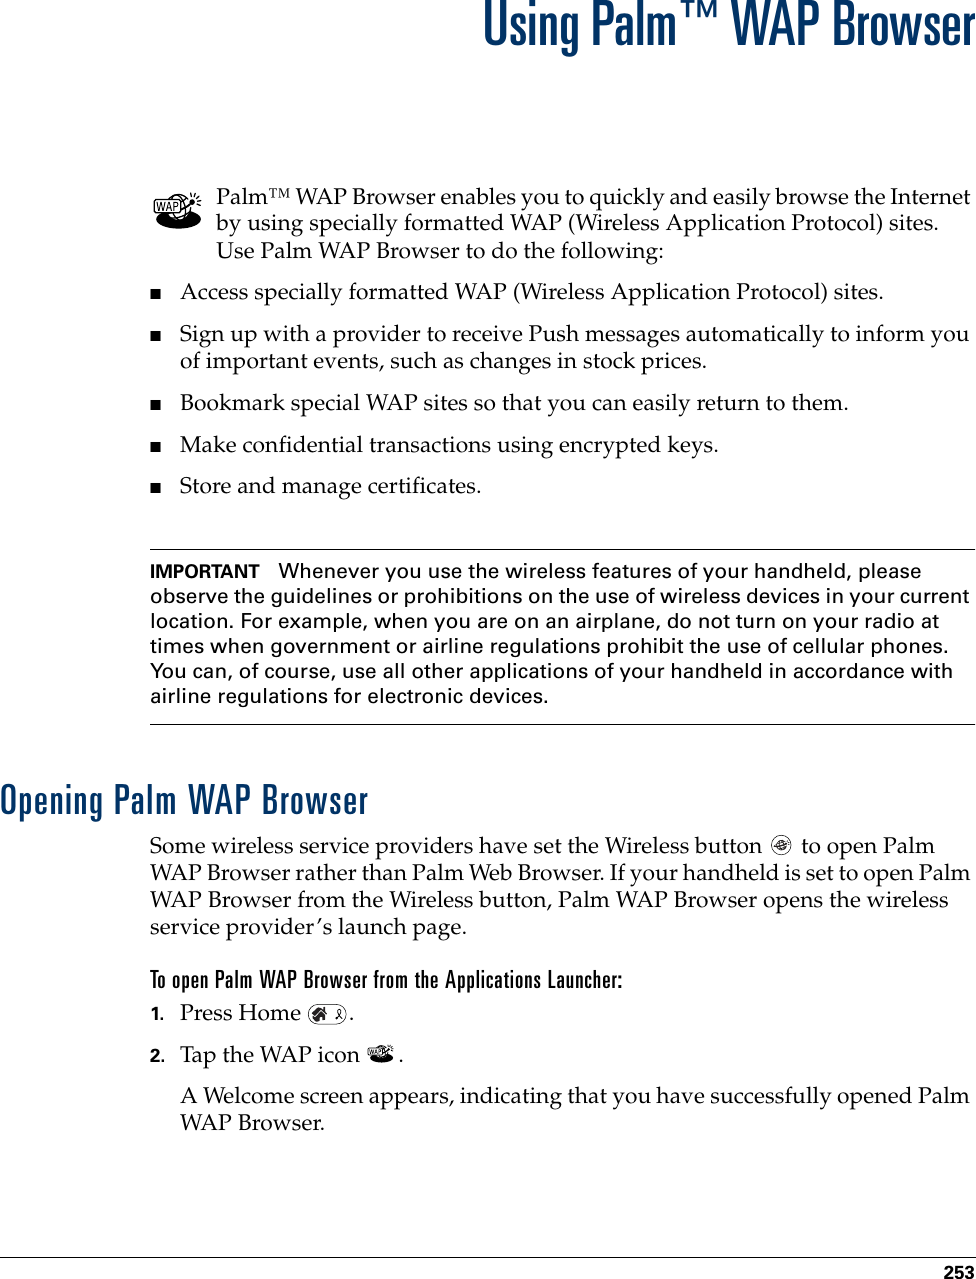 253CHAPTER 18Using Palm™ WAP BrowserPalm™ WAP Browser enables you to quickly and easily browse the Internet by using specially formatted WAP (Wireless Application Protocol) sites. Use Palm WAP Browser to do the following:■Access specially formatted WAP (Wireless Application Protocol) sites.■Sign up with a provider to receive Push messages automatically to inform you of important events, such as changes in stock prices. ■Bookmark special WAP sites so that you can easily return to them.■Make confidential transactions using encrypted keys.■Store and manage certificates.IMPORTANT Whenever you use the wireless features of your handheld, please observe the guidelines or prohibitions on the use of wireless devices in your current location. For example, when you are on an airplane, do not turn on your radio at times when government or airline regulations prohibit the use of cellular phones. You can, of course, use all other applications of your handheld in accordance with airline regulations for electronic devices.Opening Palm WAP BrowserSome wireless service providers have set the Wireless button   to open Palm WAP Browser rather than Palm Web Browser. If your handheld is set to open Palm WAP Browser from the Wireless button, Palm WAP Browser opens the wireless service provider’s launch page.To open Palm WAP Browser from the Applications Launcher:1. Press Home  .2. Tap the WAP icon  .A Welcome screen appears, indicating that you have successfully opened Palm WAP Browser.Palm, Inc. Confidential